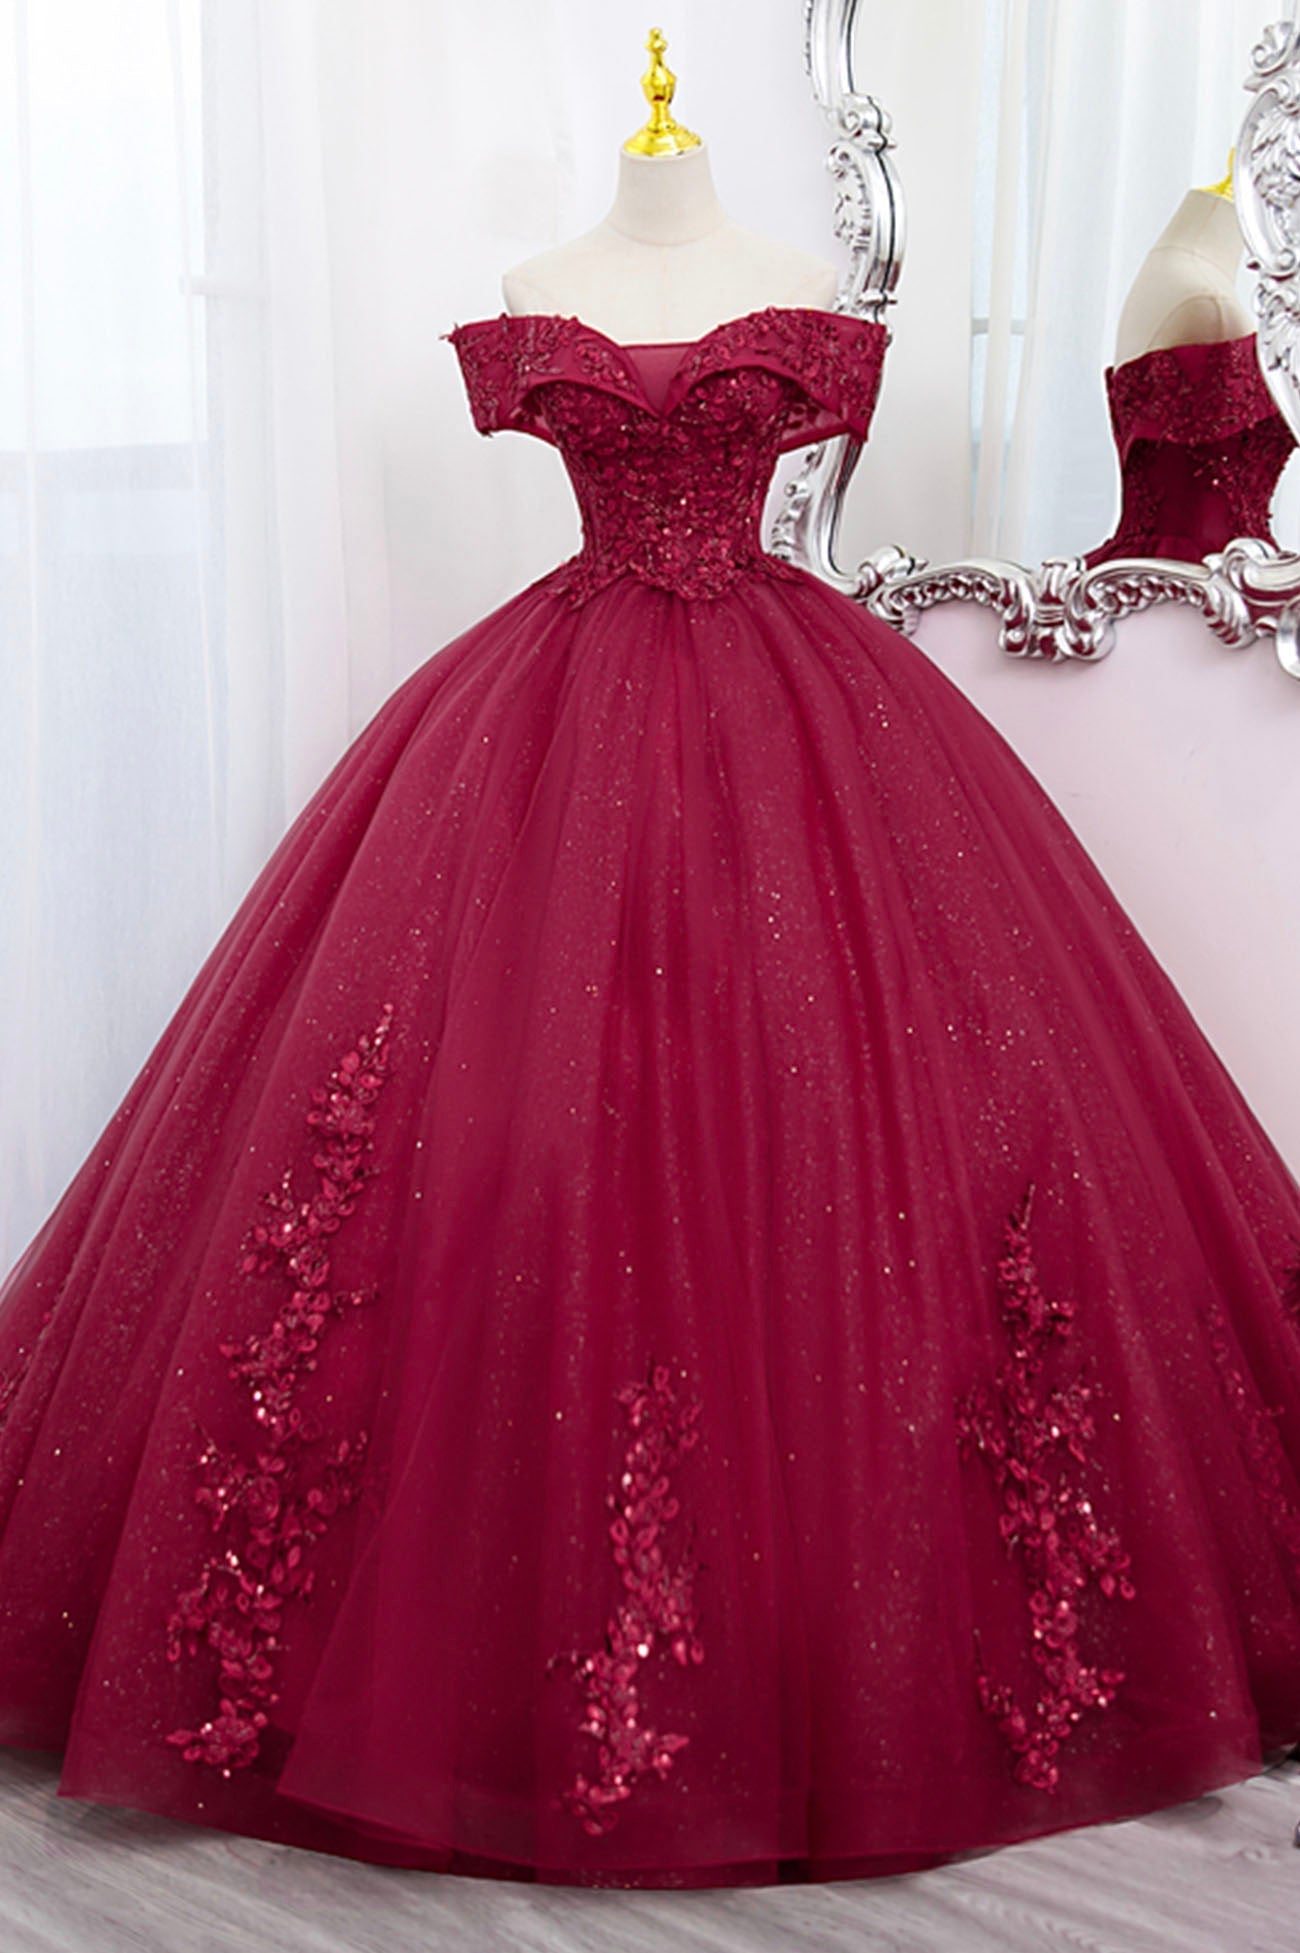 Party Dress Dress Code, Burgundy Sweet 16 Formal Gown with Lace, Off the Shoulder Prom Dress Party Dress